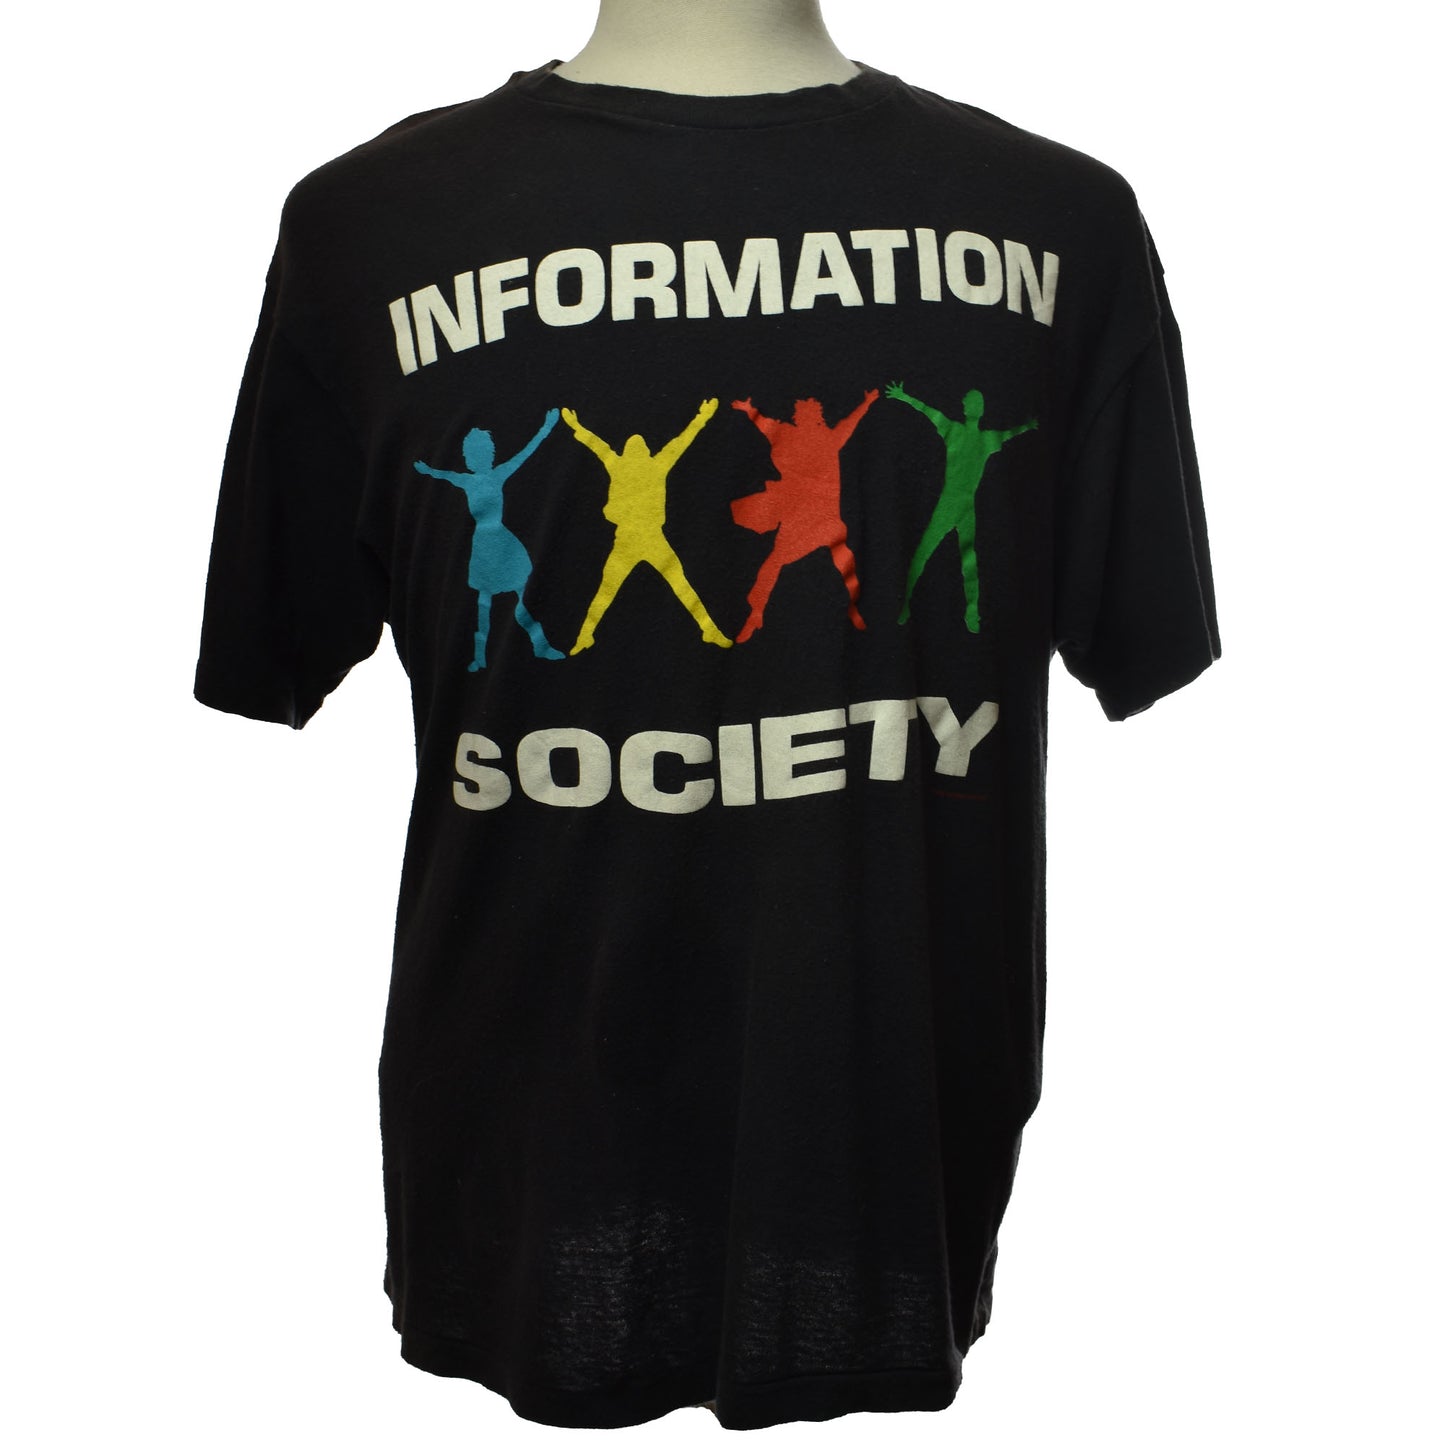 Vintage 1988 Information Society New Wave Synth Pop Tee Single Stitch Made in USA